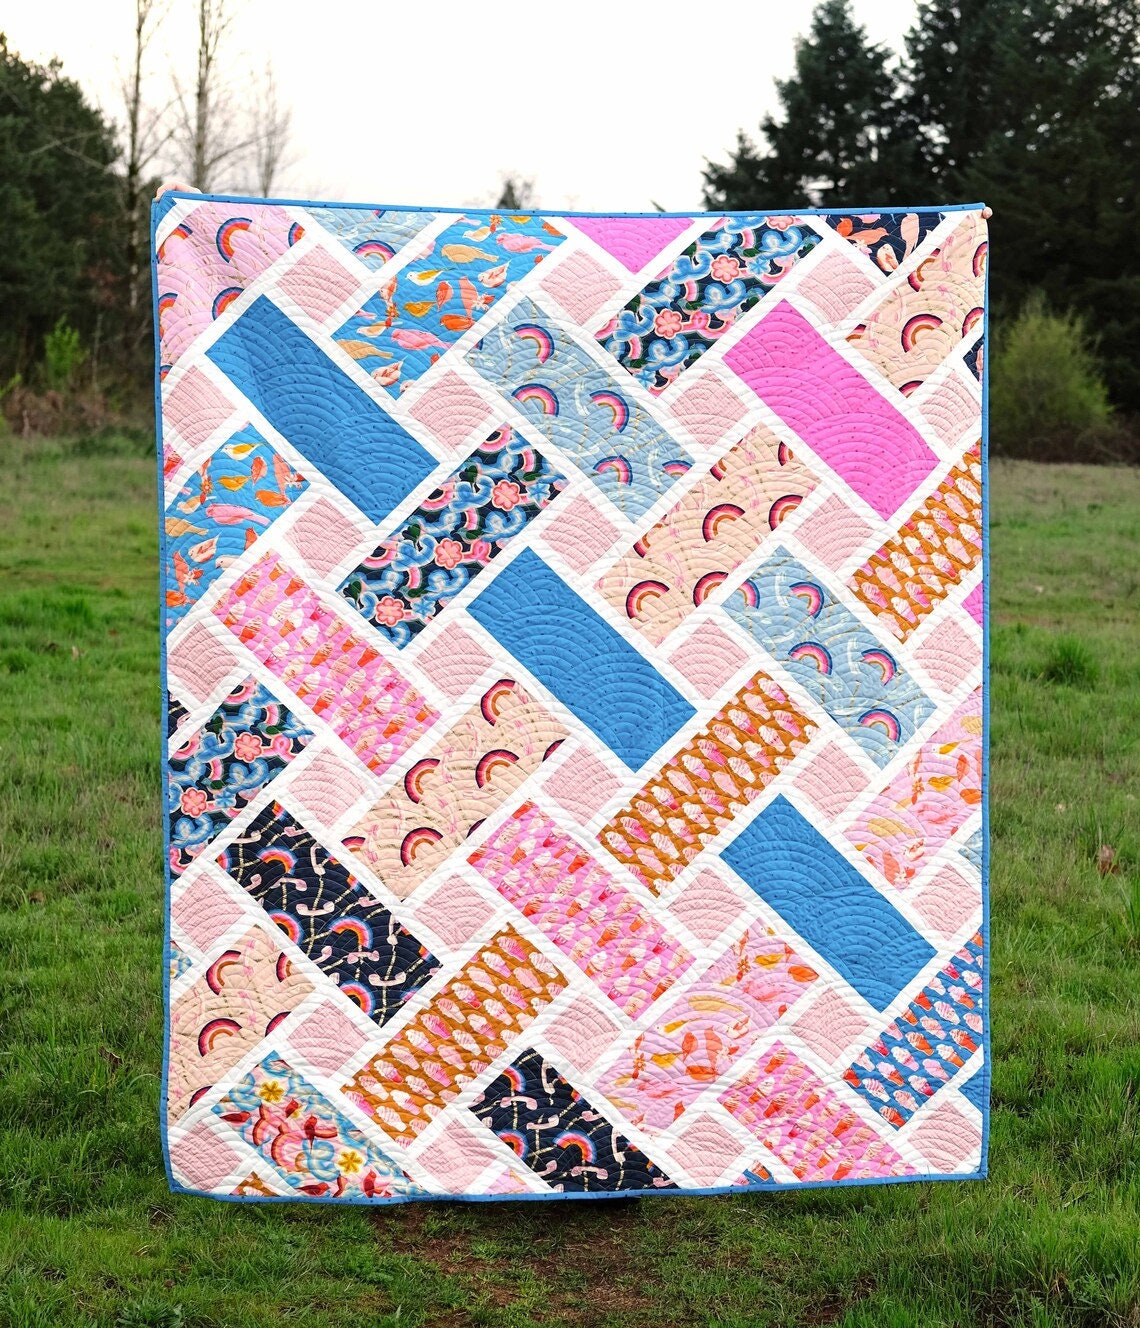 The Tessa Quilt Pattern - Erica Jackman for Kitchen Table Quilting - 3 Sizes